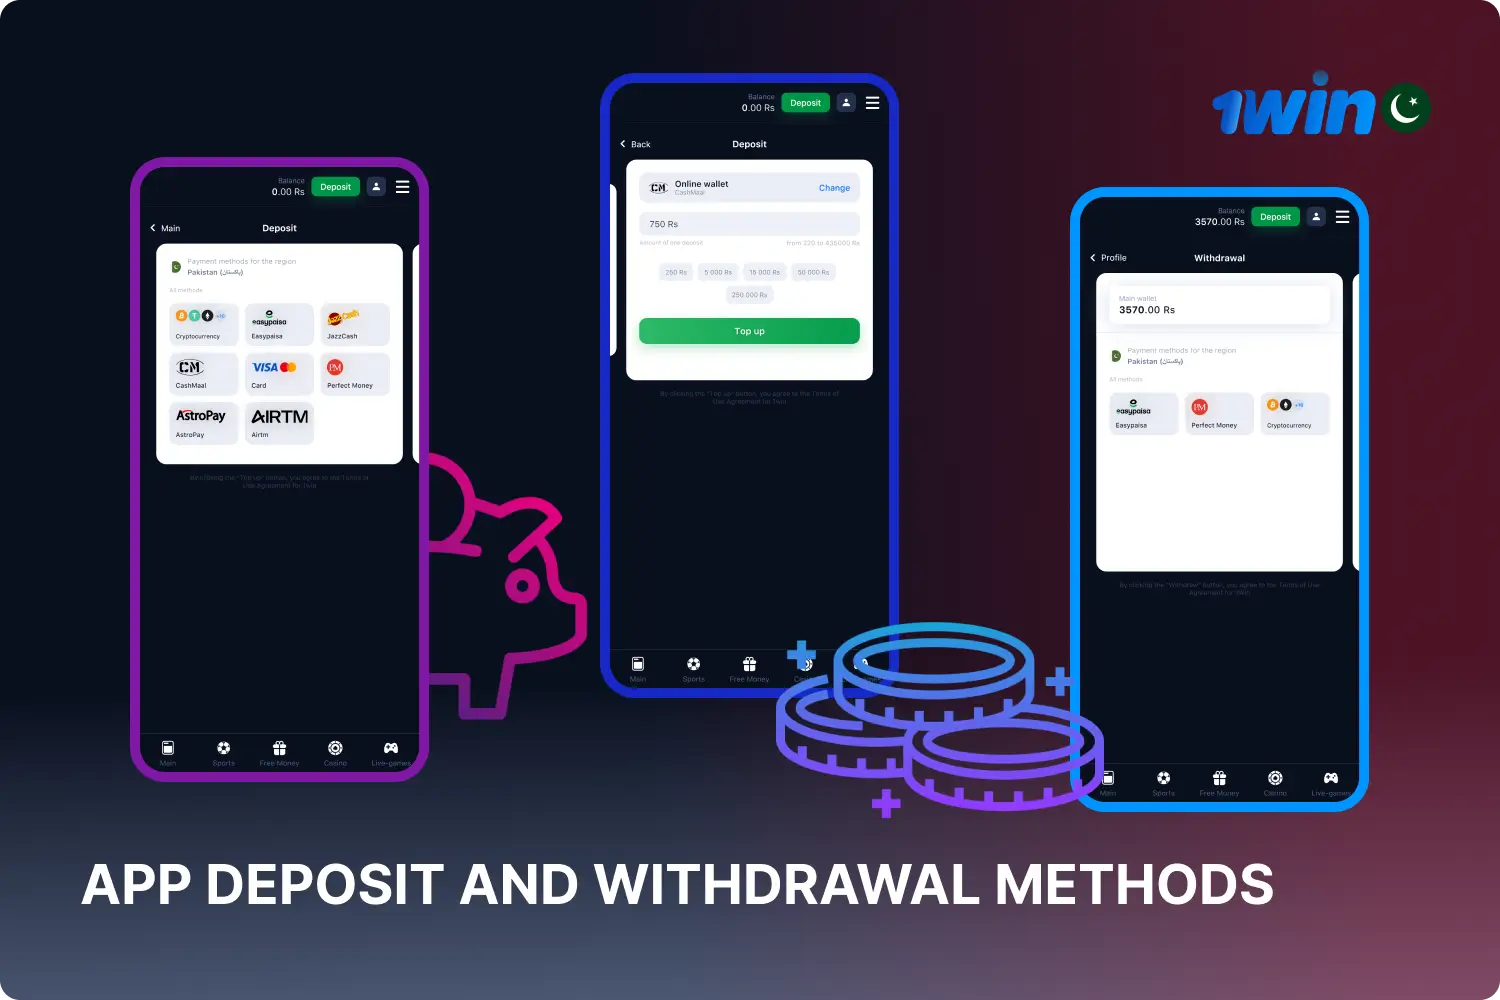 On the 1win mobile app, Pakistani users can use various deposit and withdrawal methods